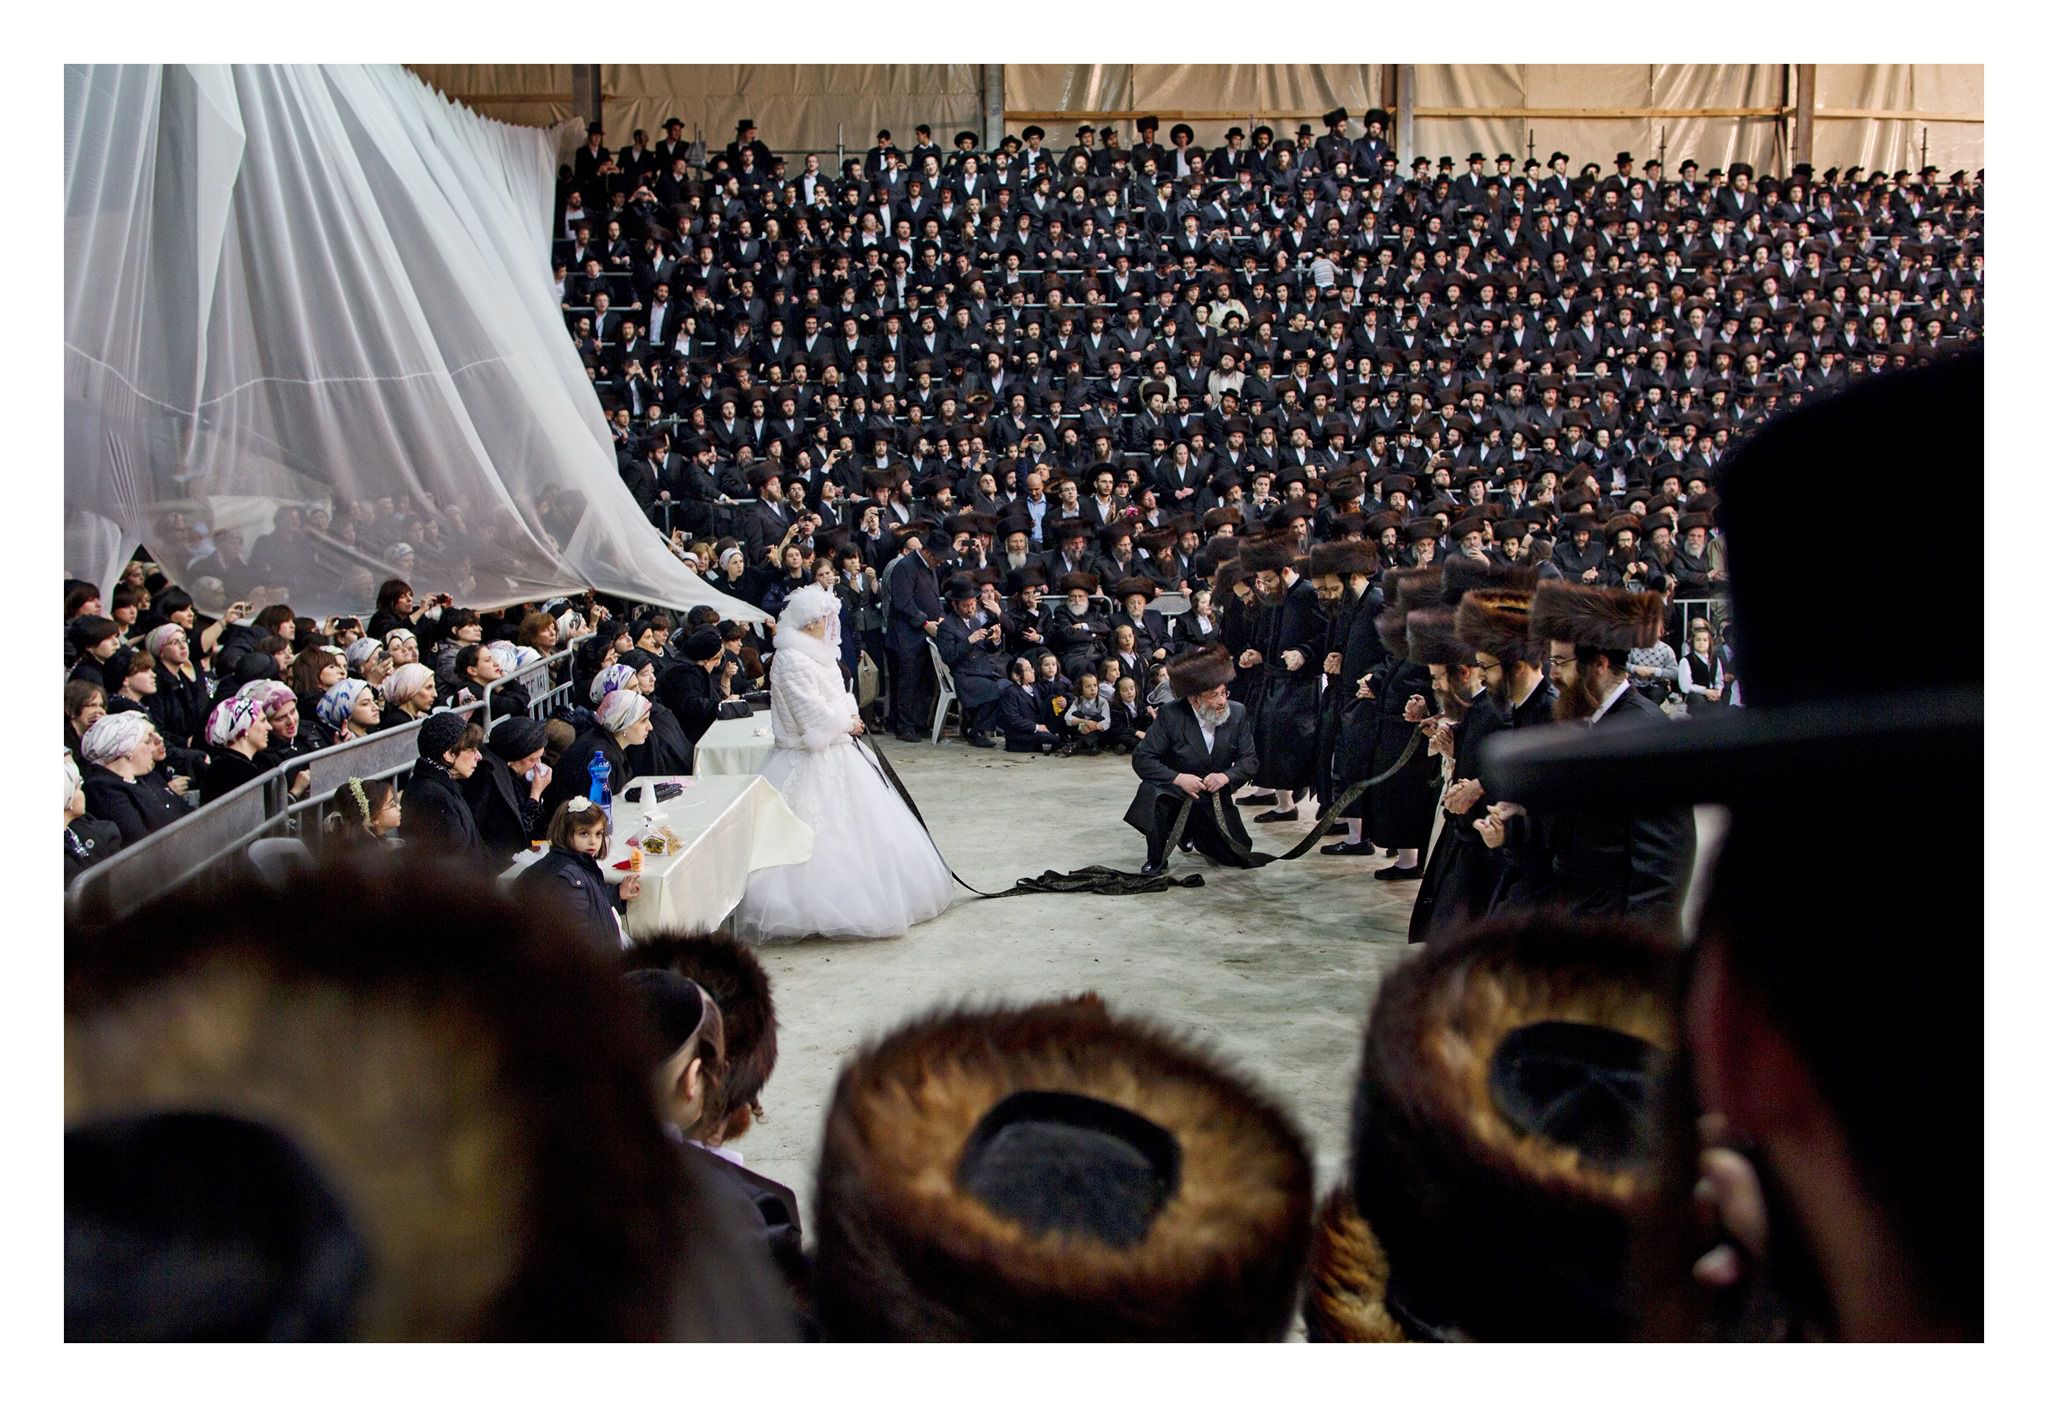 Oded Balilty, A Royal Wedding (detail), 2013. Archival print. Courtesy of the Artist and N&N Aman Gallery